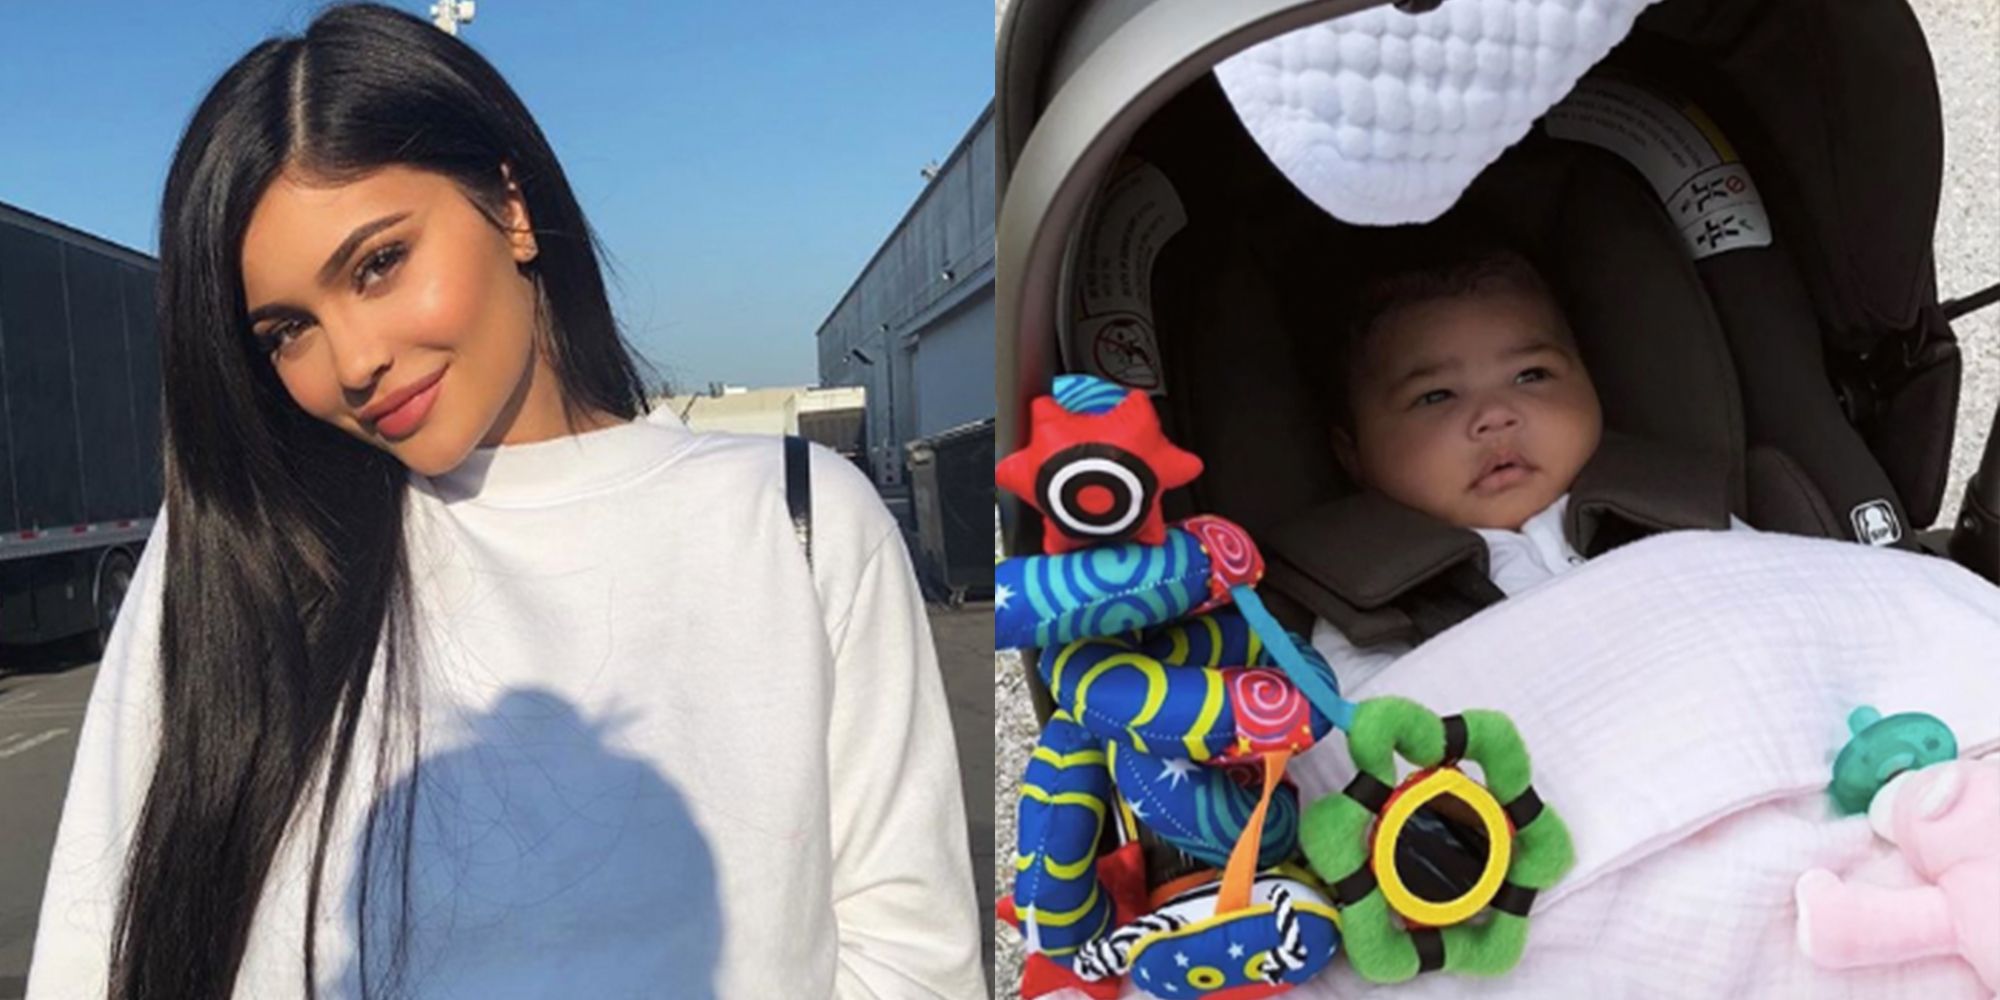 Kylie Jenner and Travis Scott Take Baby Stormi Webster on a Walk